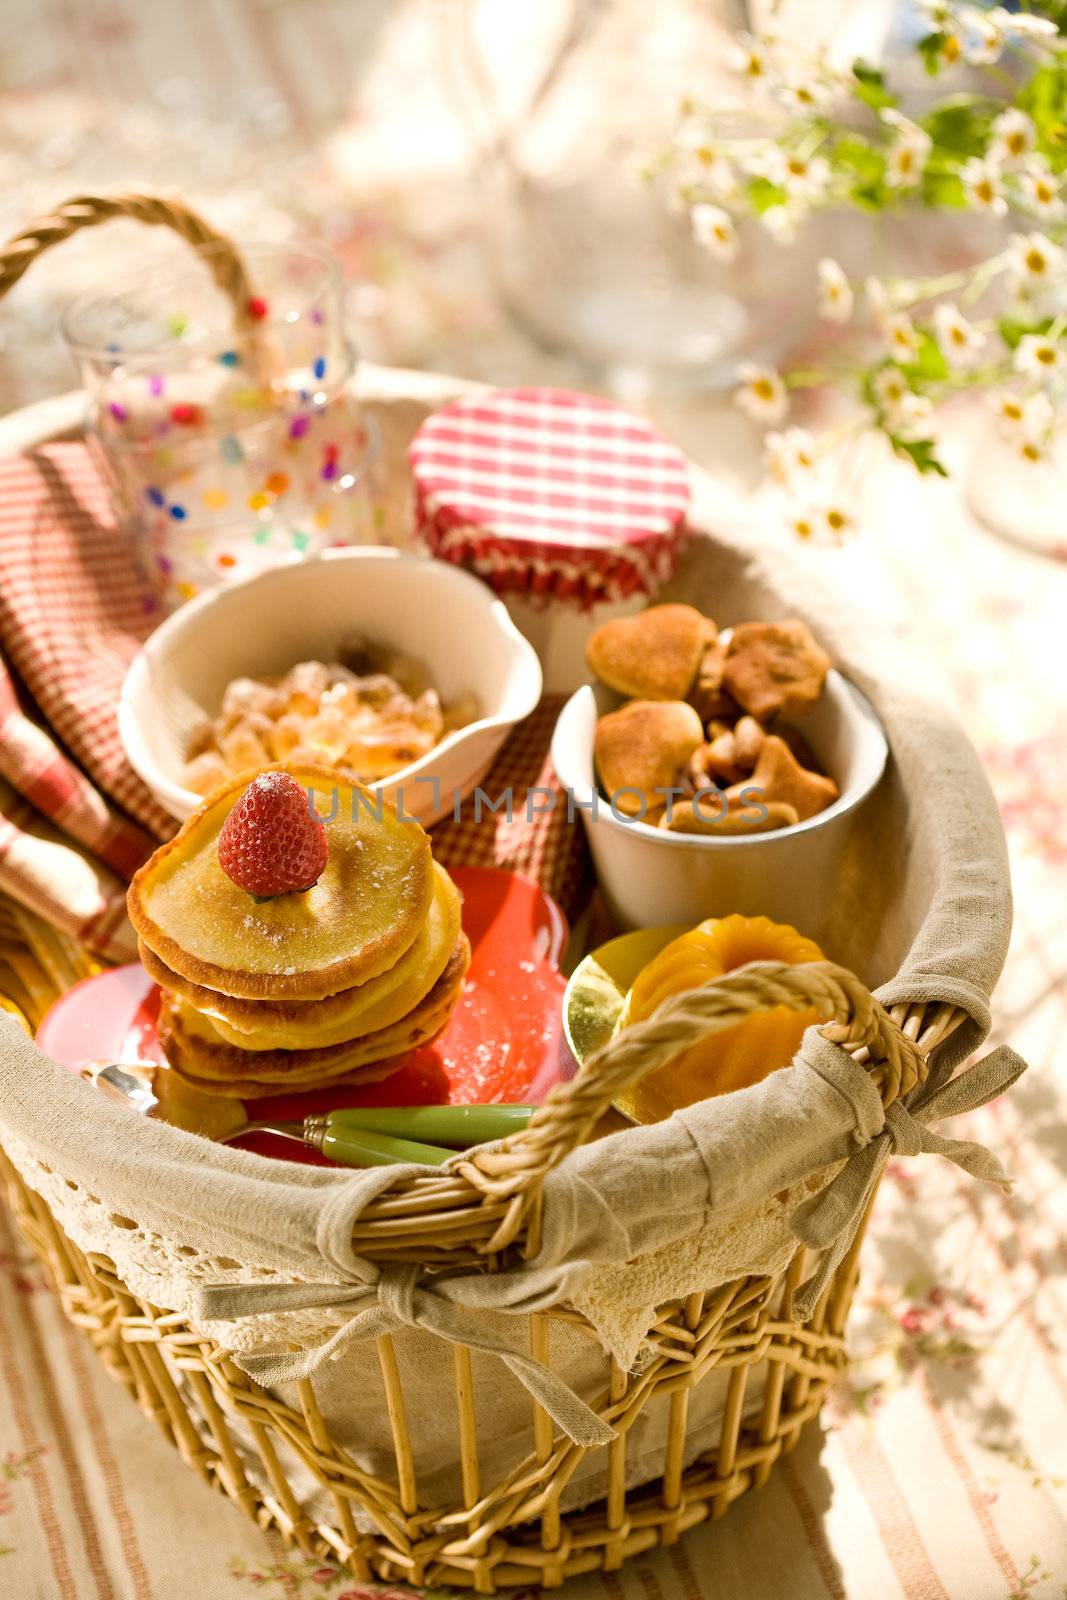 Strawberry pancakes, cookies and sweets in basket